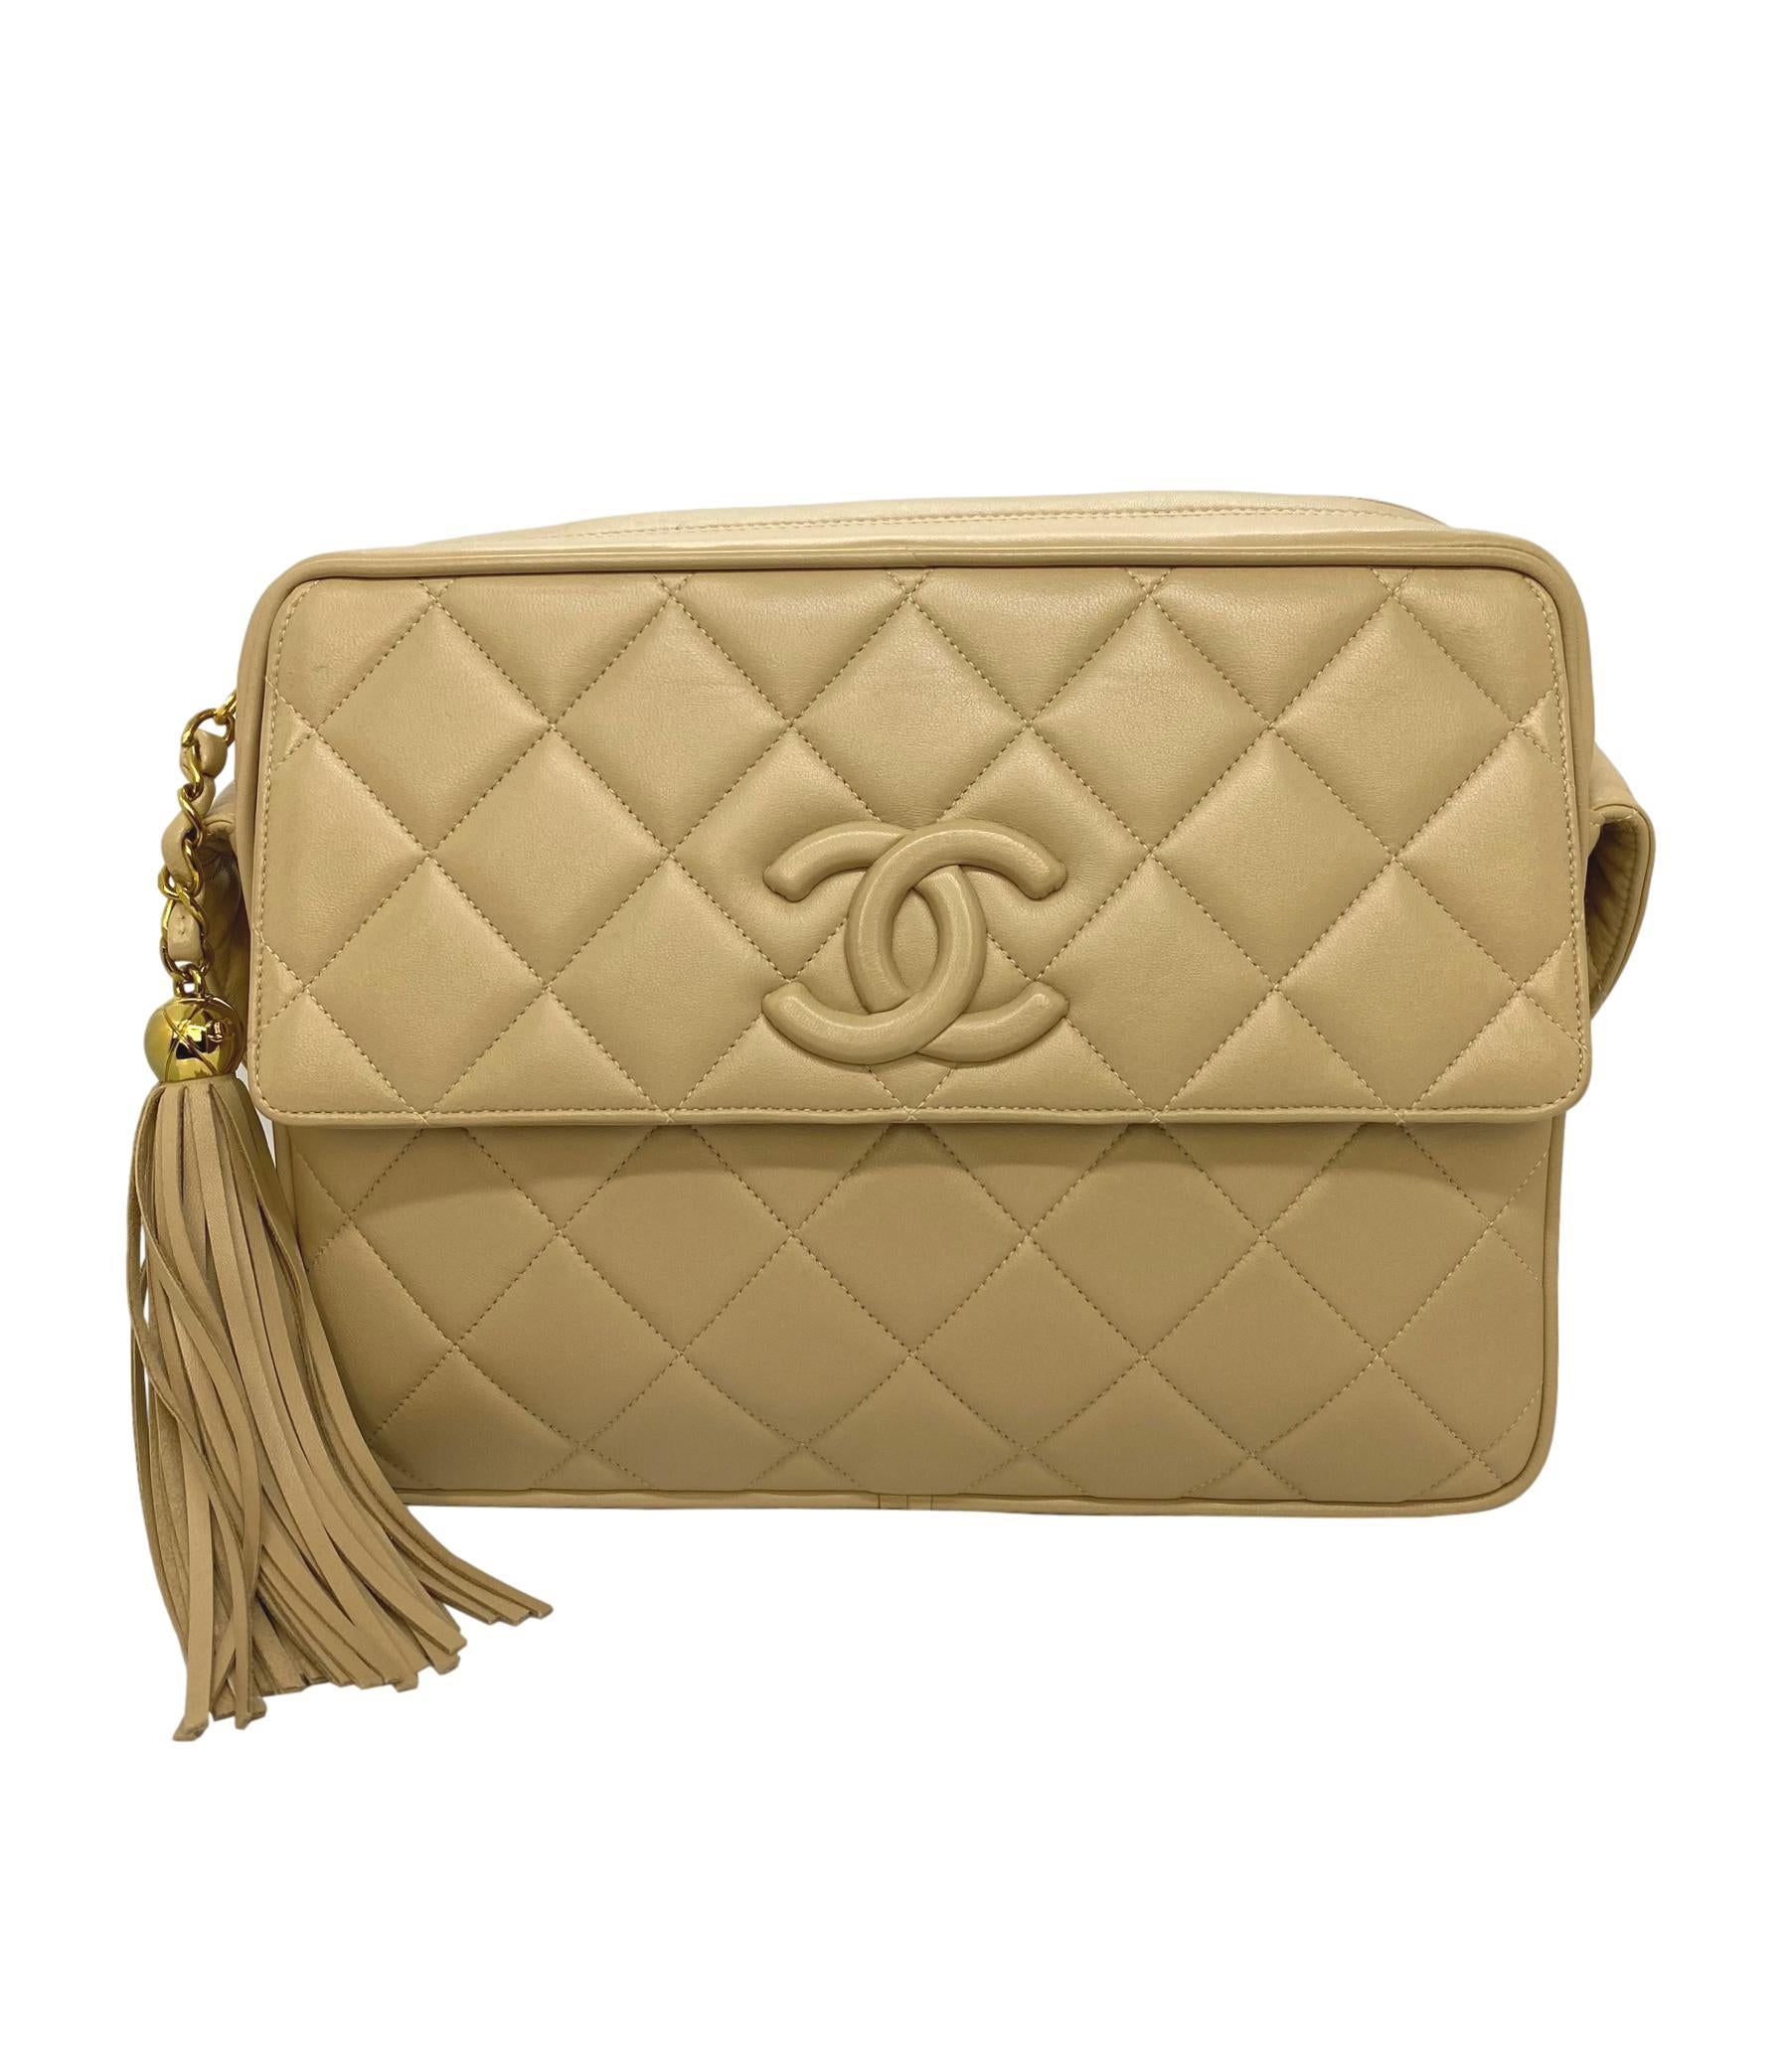 Chanel Vintage Beige Quilted Lambskin Leather Camera Bag with Gold Hardware. This highly coveted and rare collectible crossbody camera bag was produced between 1994 - 1996, baring a serial code of 